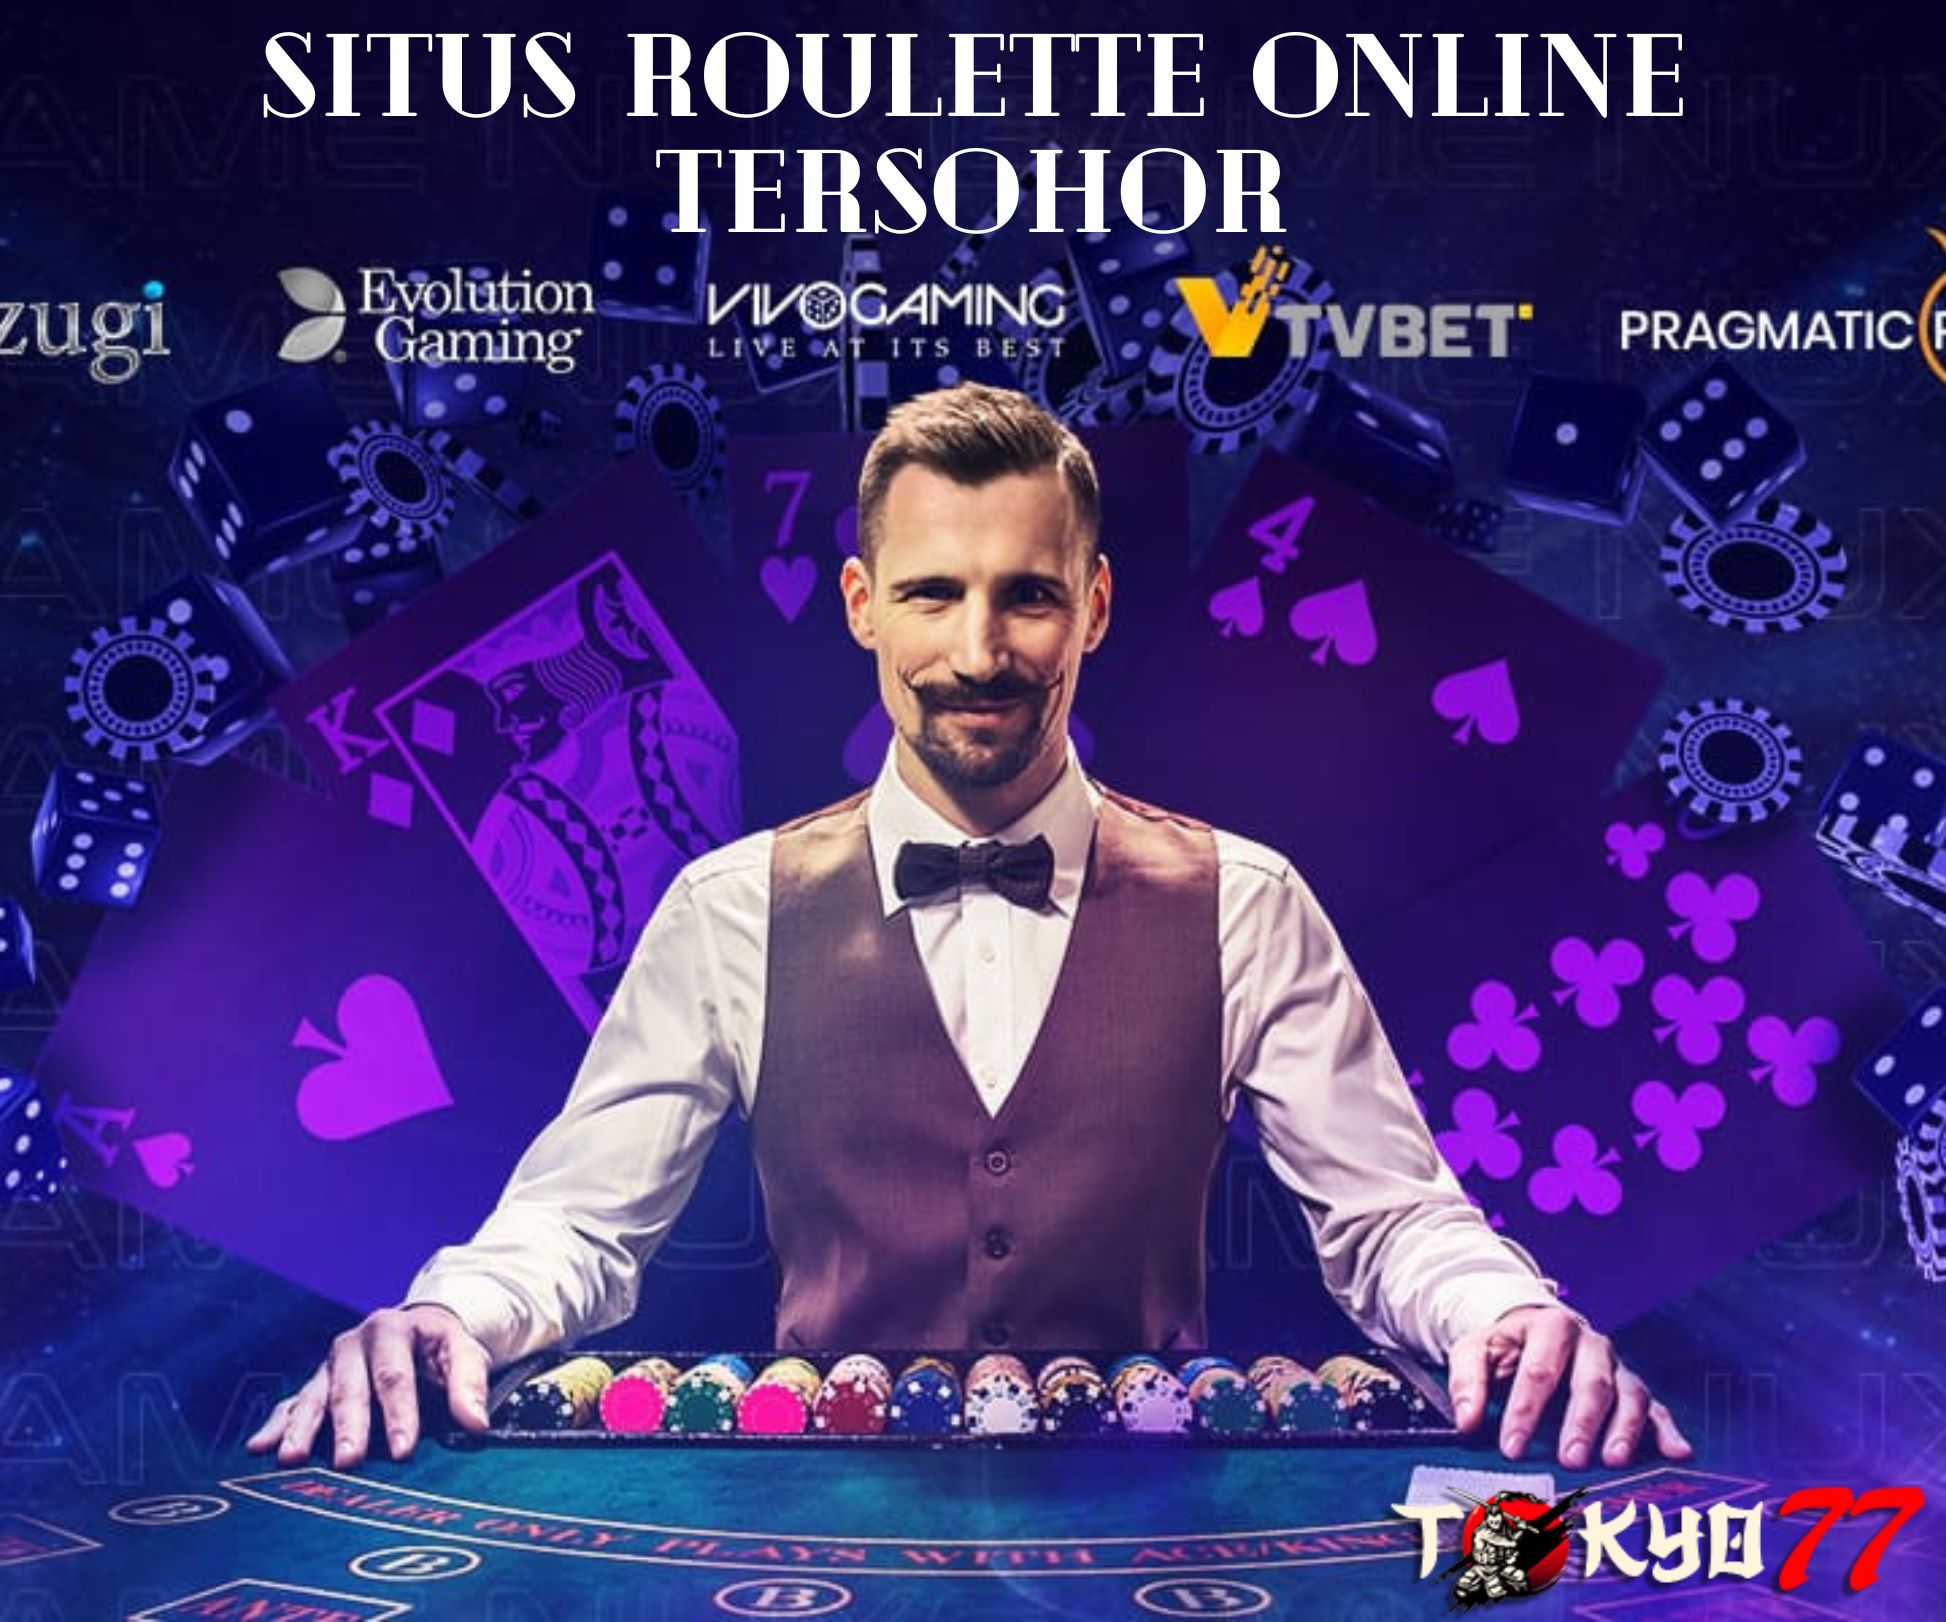 Online Roulette betting with the highest chance of winning